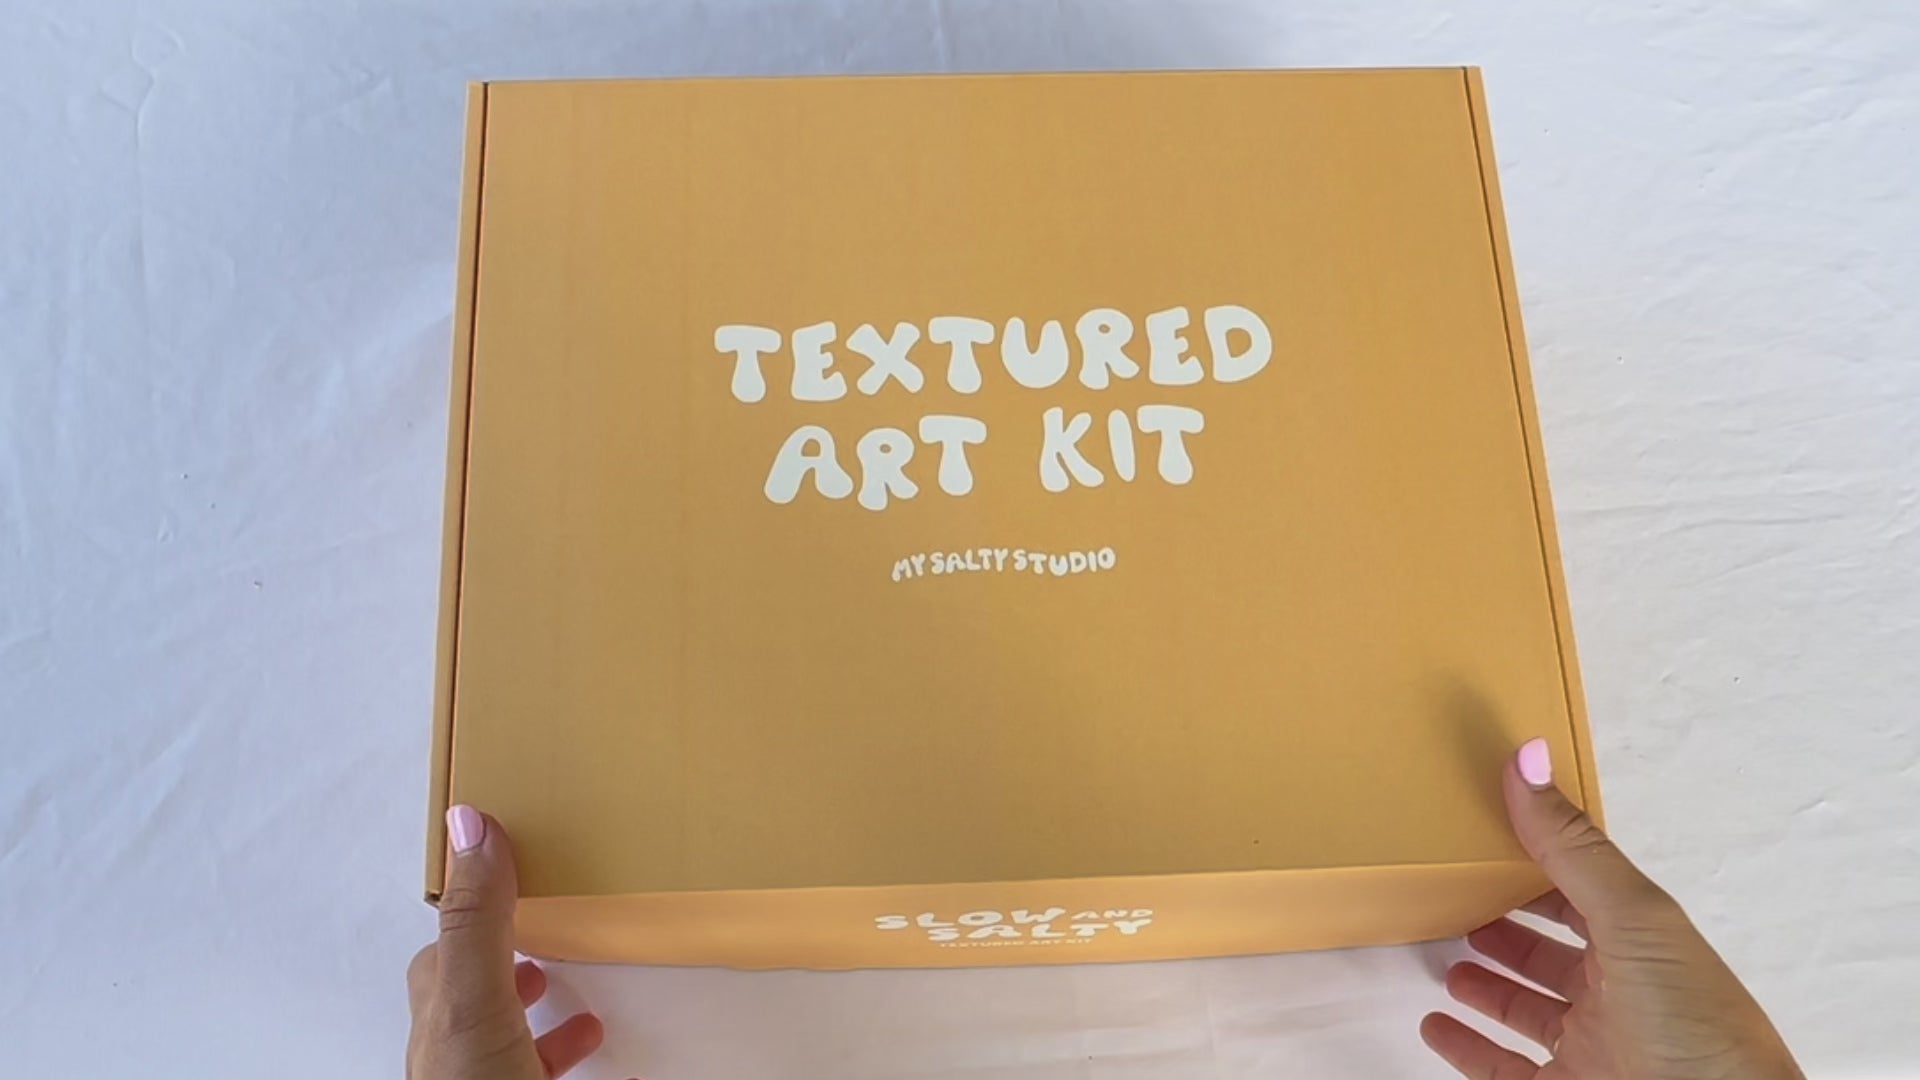 Load video: This video showcases what is inside the textured art kit box